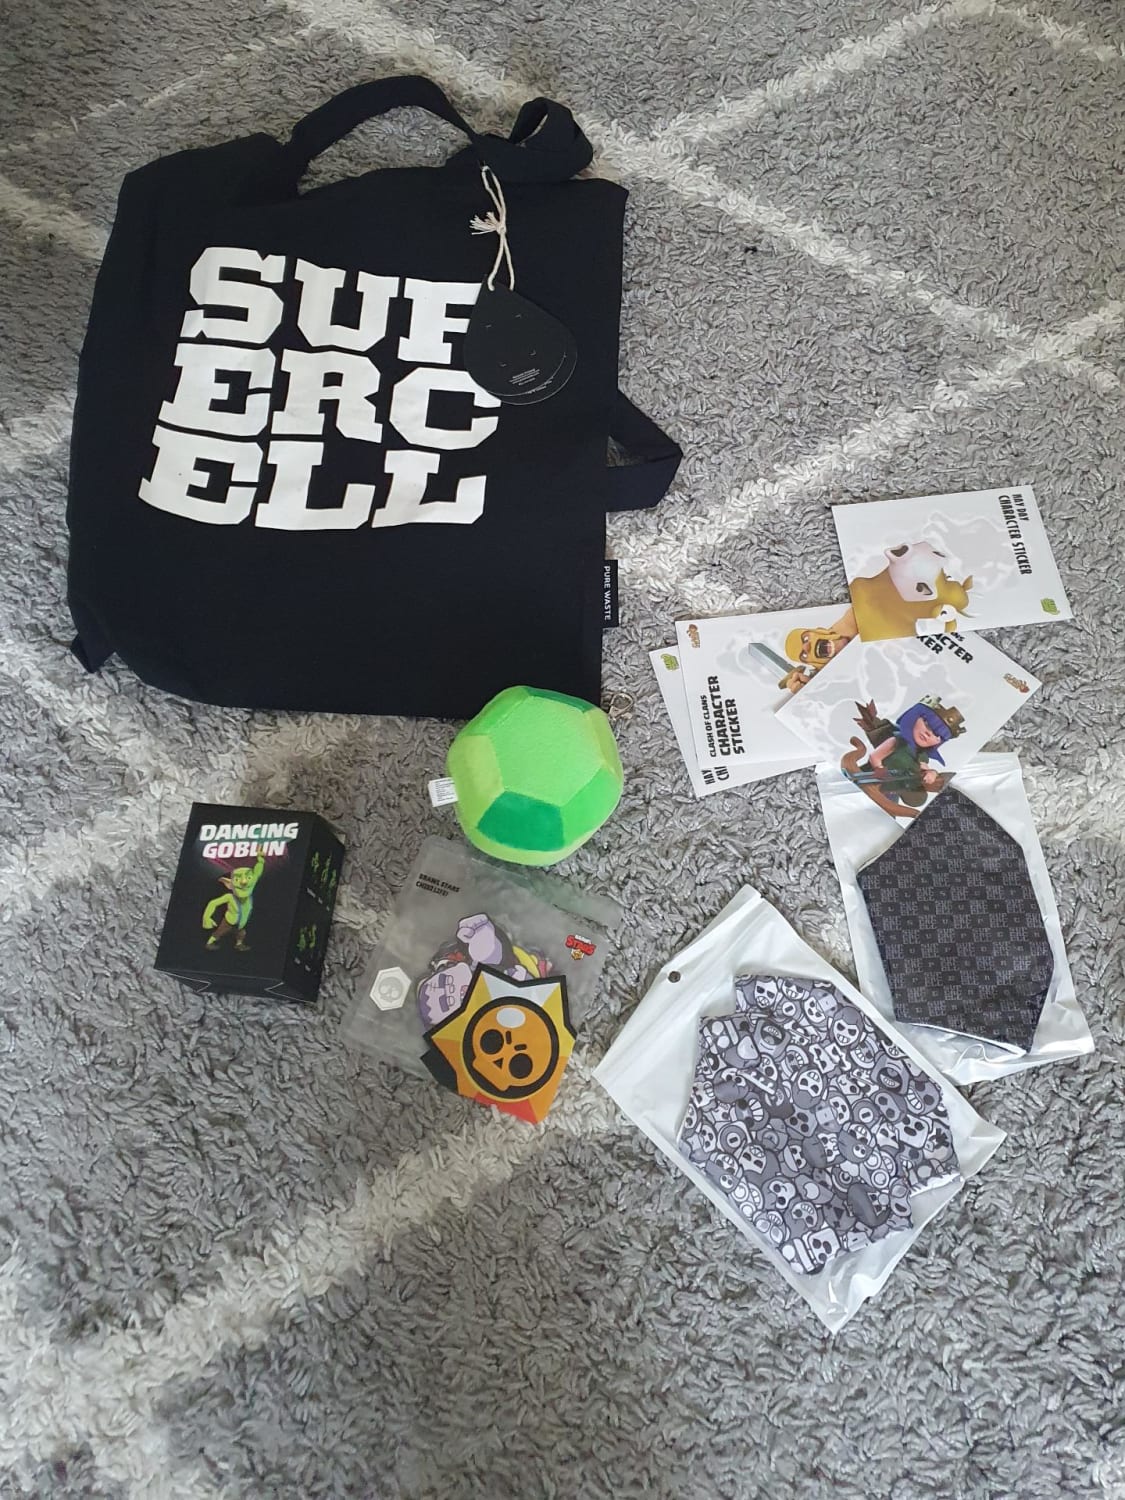 A supercell employee went to my brothers school and all students were given one of these gift bags